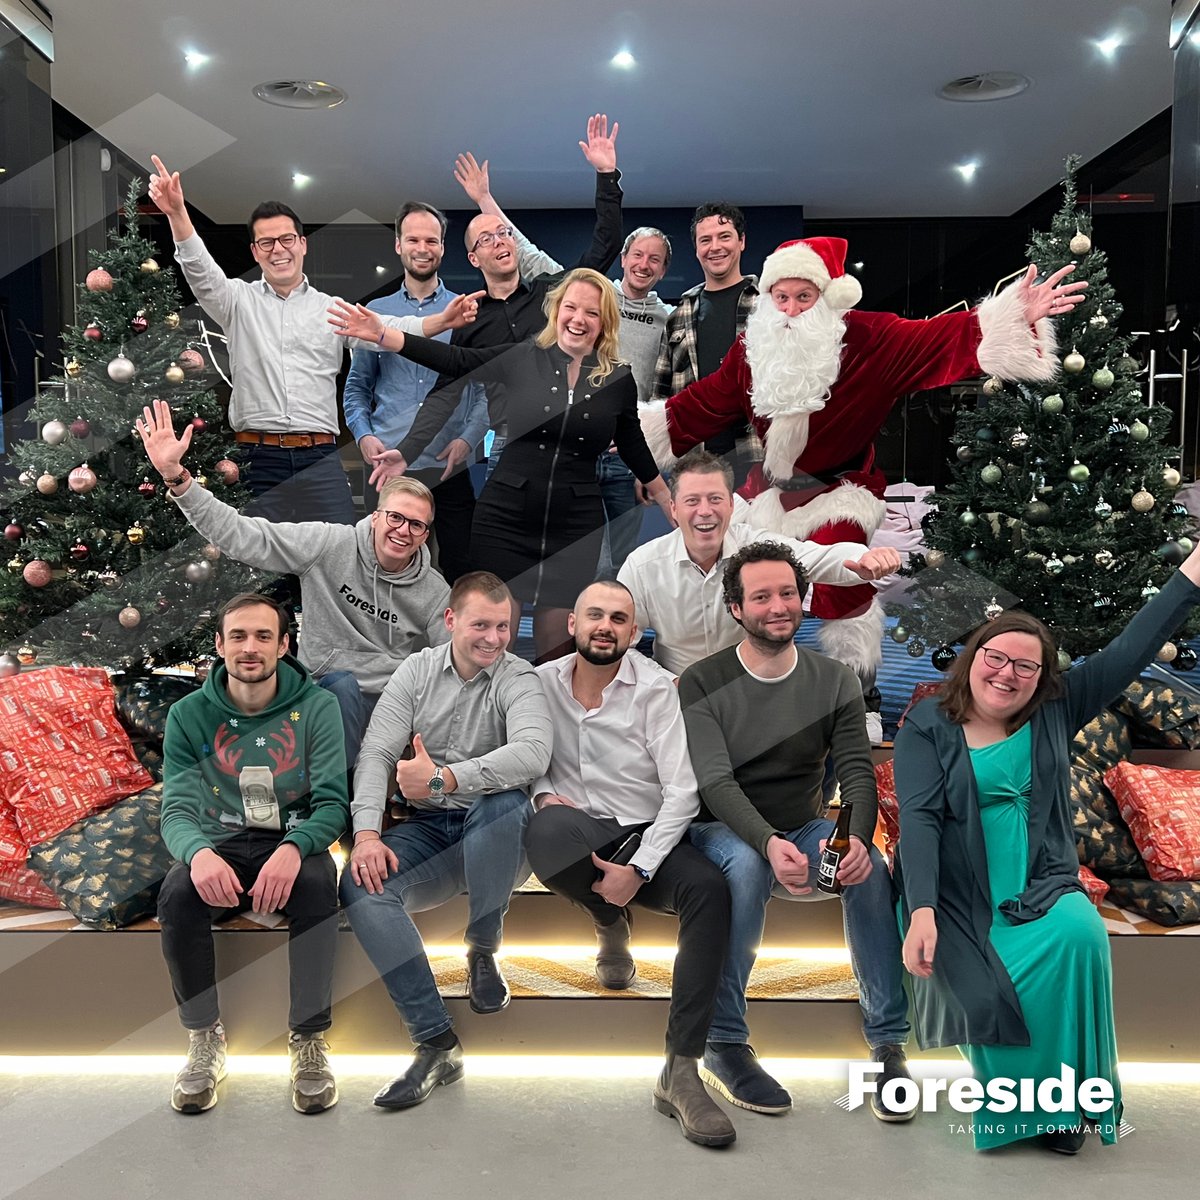 Happy Holidays from Team Foreside!